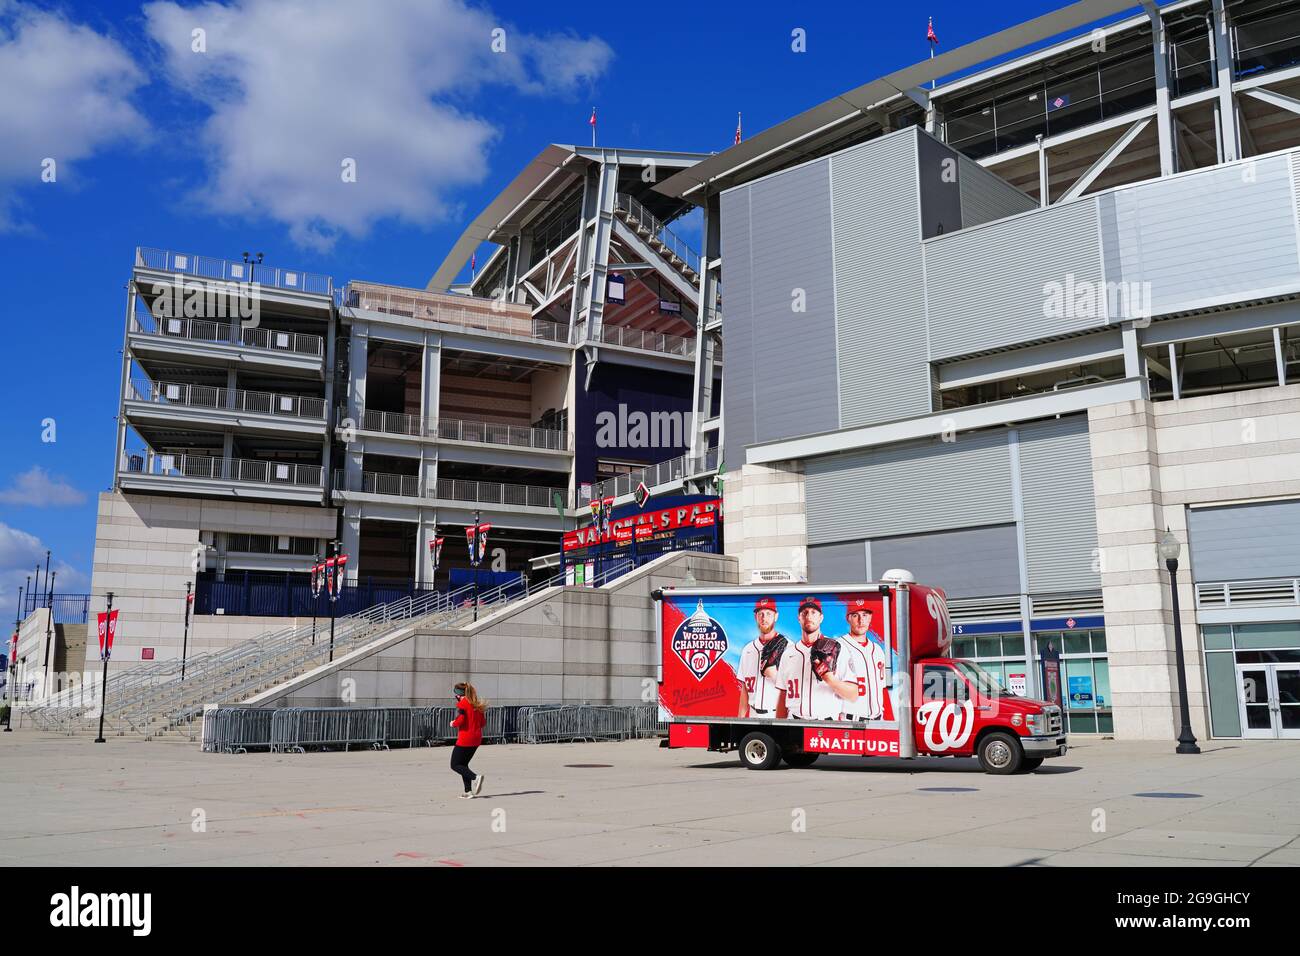 WASHINGTON, DC -2 APR 2021- View of the Nationals Park, a baseball park along the Anacostia River in the Navy Yard neighborhood of Washington, D.C. Stock Photo